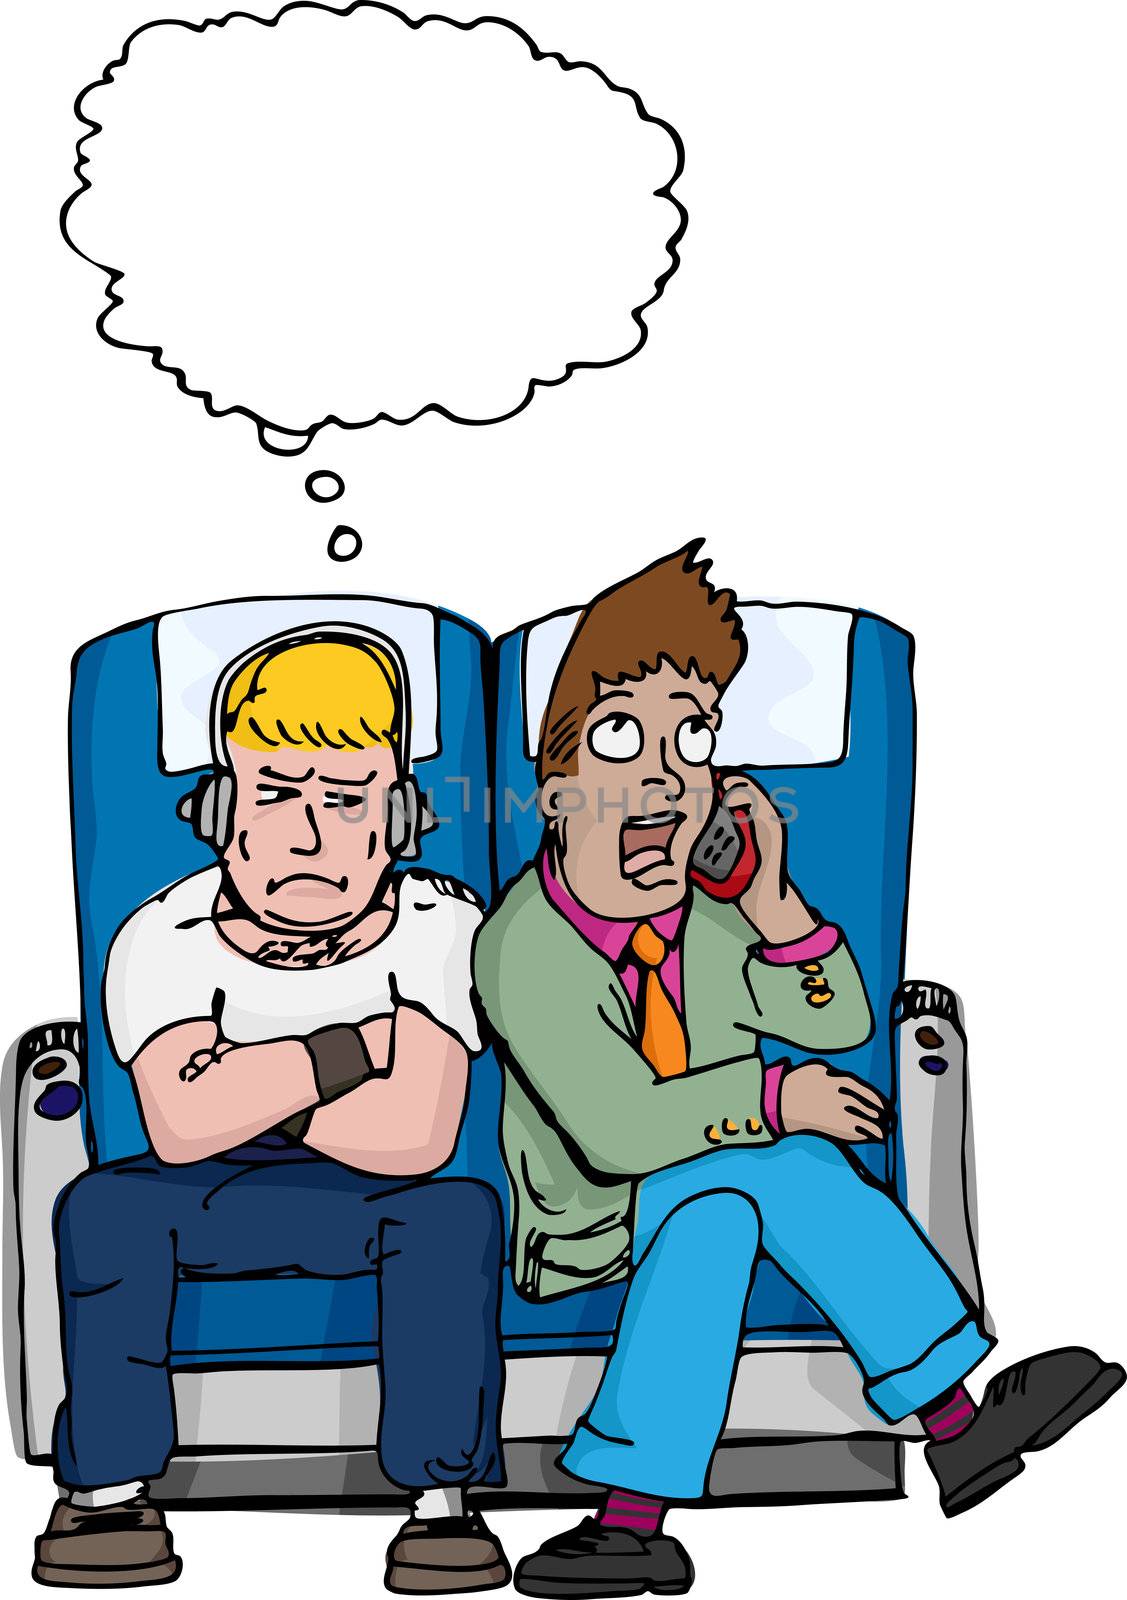 Frustrated muscular passenger with thought balloon sits next to loud man on mobile telephone.